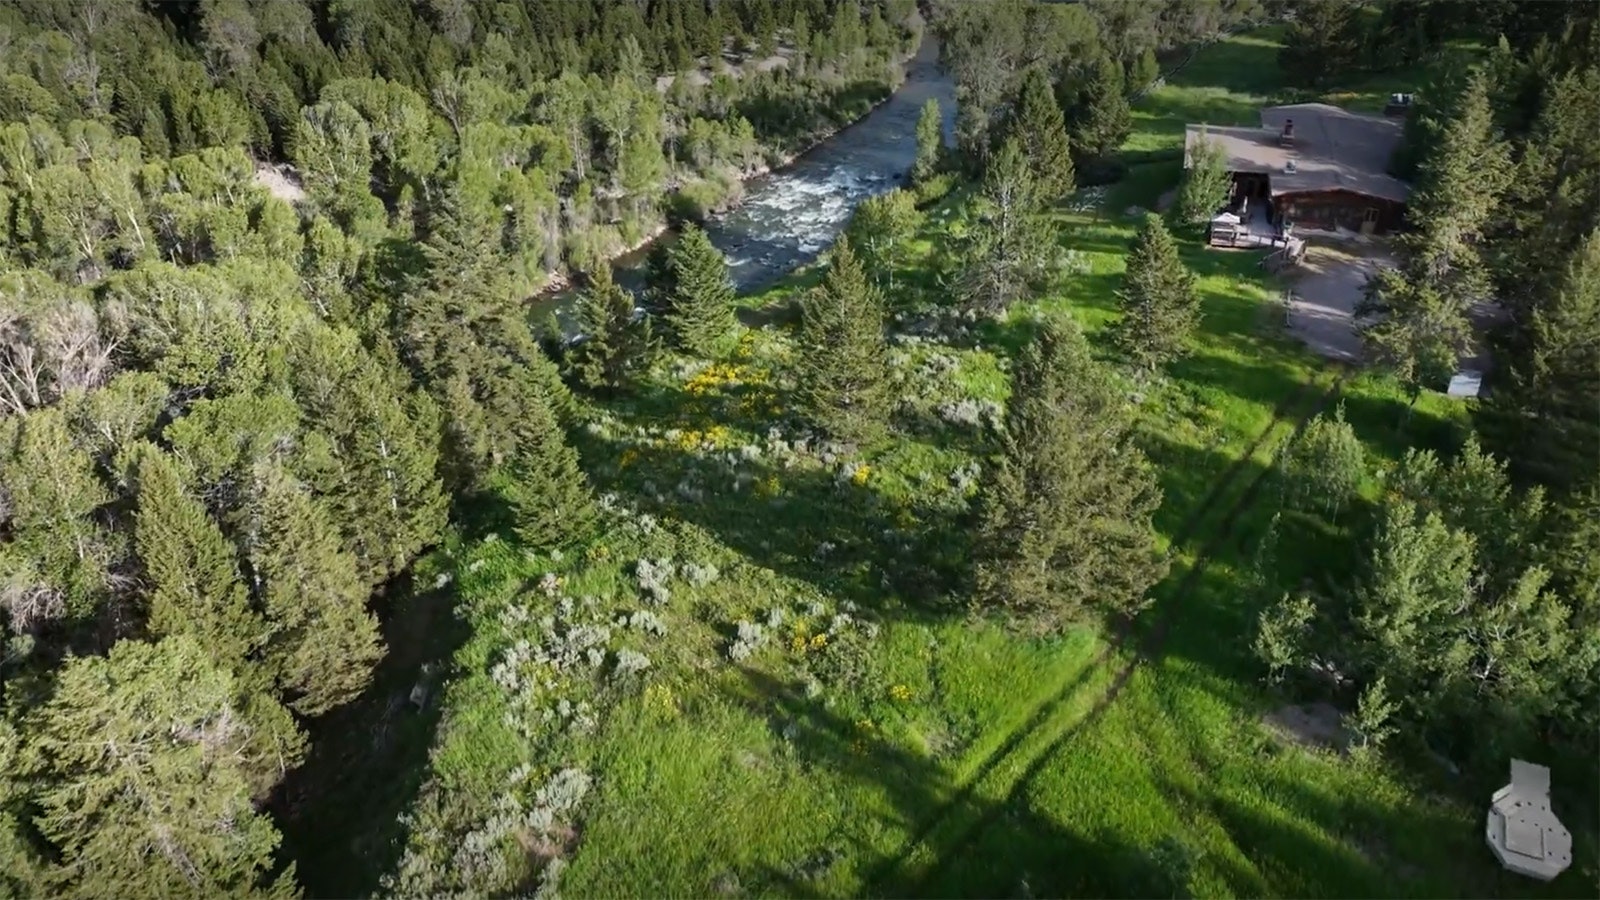 The Historic Grand View River Ranch, formerly the Gros Ventre Ranch, has sold. The pristine 118-acre ranch was listed for $58 million for the property situated along the Gros Ventre River adjacent to Grand Teton National Park.